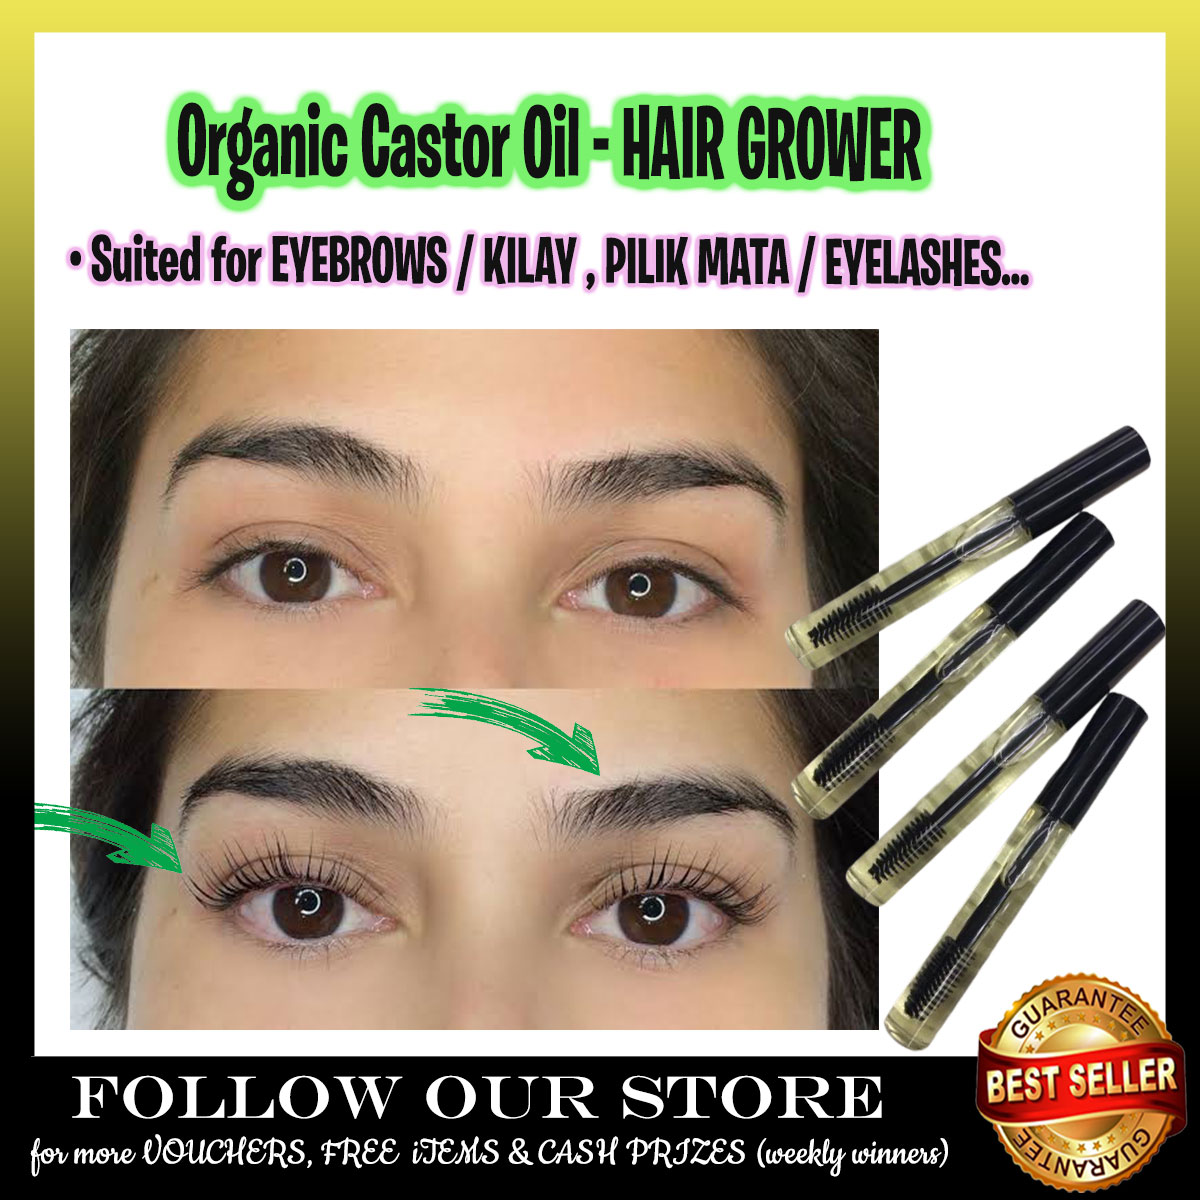 100% ORGANIC CASTOR OIL with aloe vera FOR EYELASHES AND EYEBROWS , Eyebrow  Grower ,Eyelash Grower | Pure Natural Organic Carrier Oil for Stimulates  Growth for Eyelashes, Eyebrows, Hair, Eyelash Growth Serum |